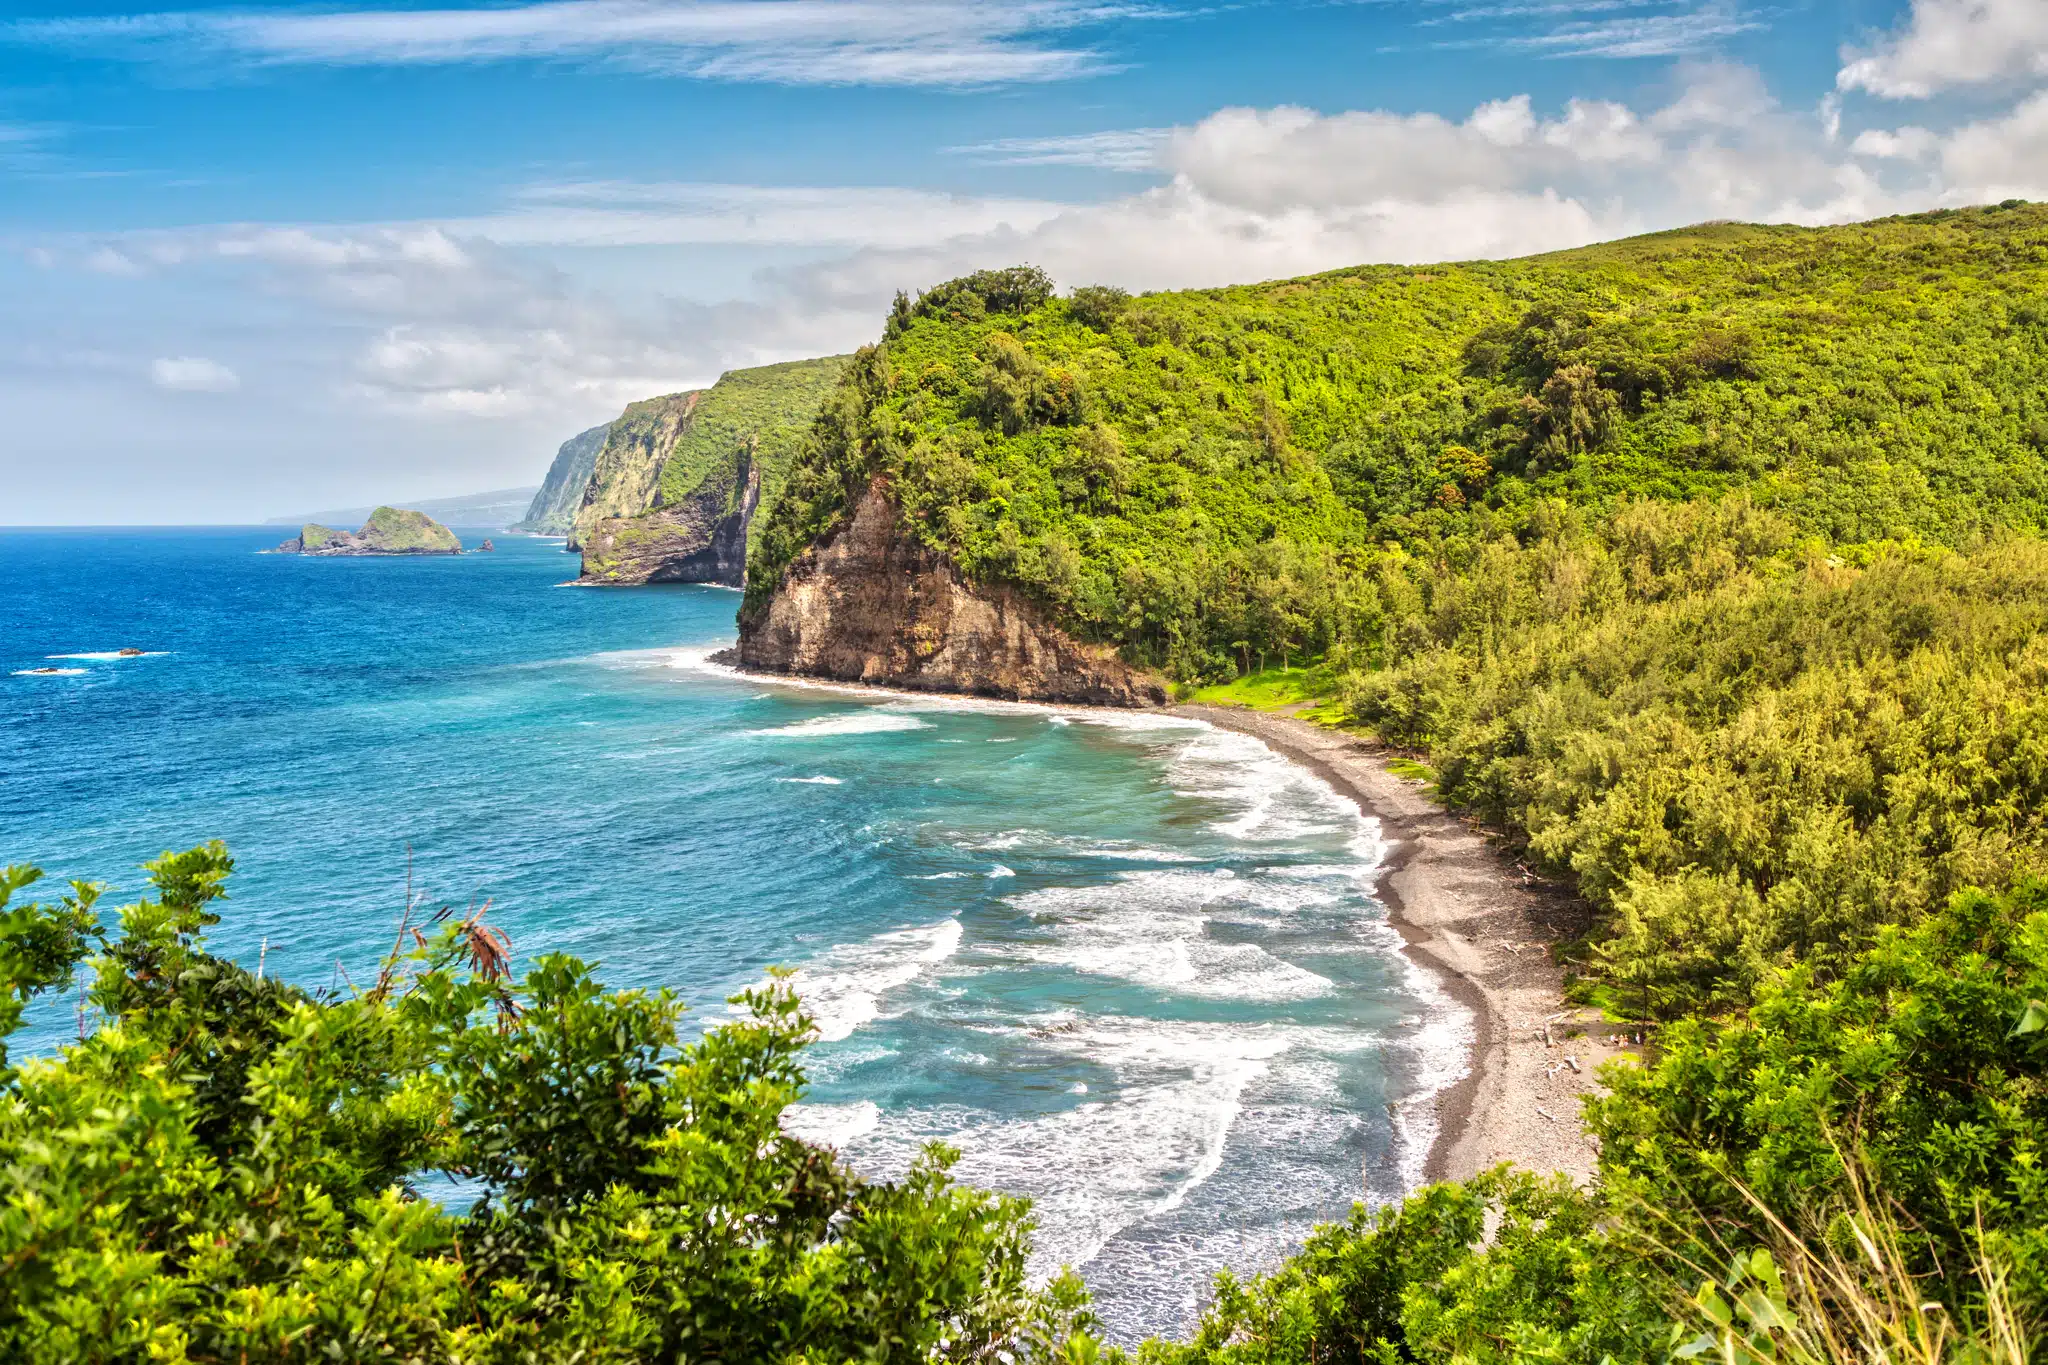 Pololu Valley Trail is a Hiking Trail located in the city of Kapaau on Big Island, Hawaii